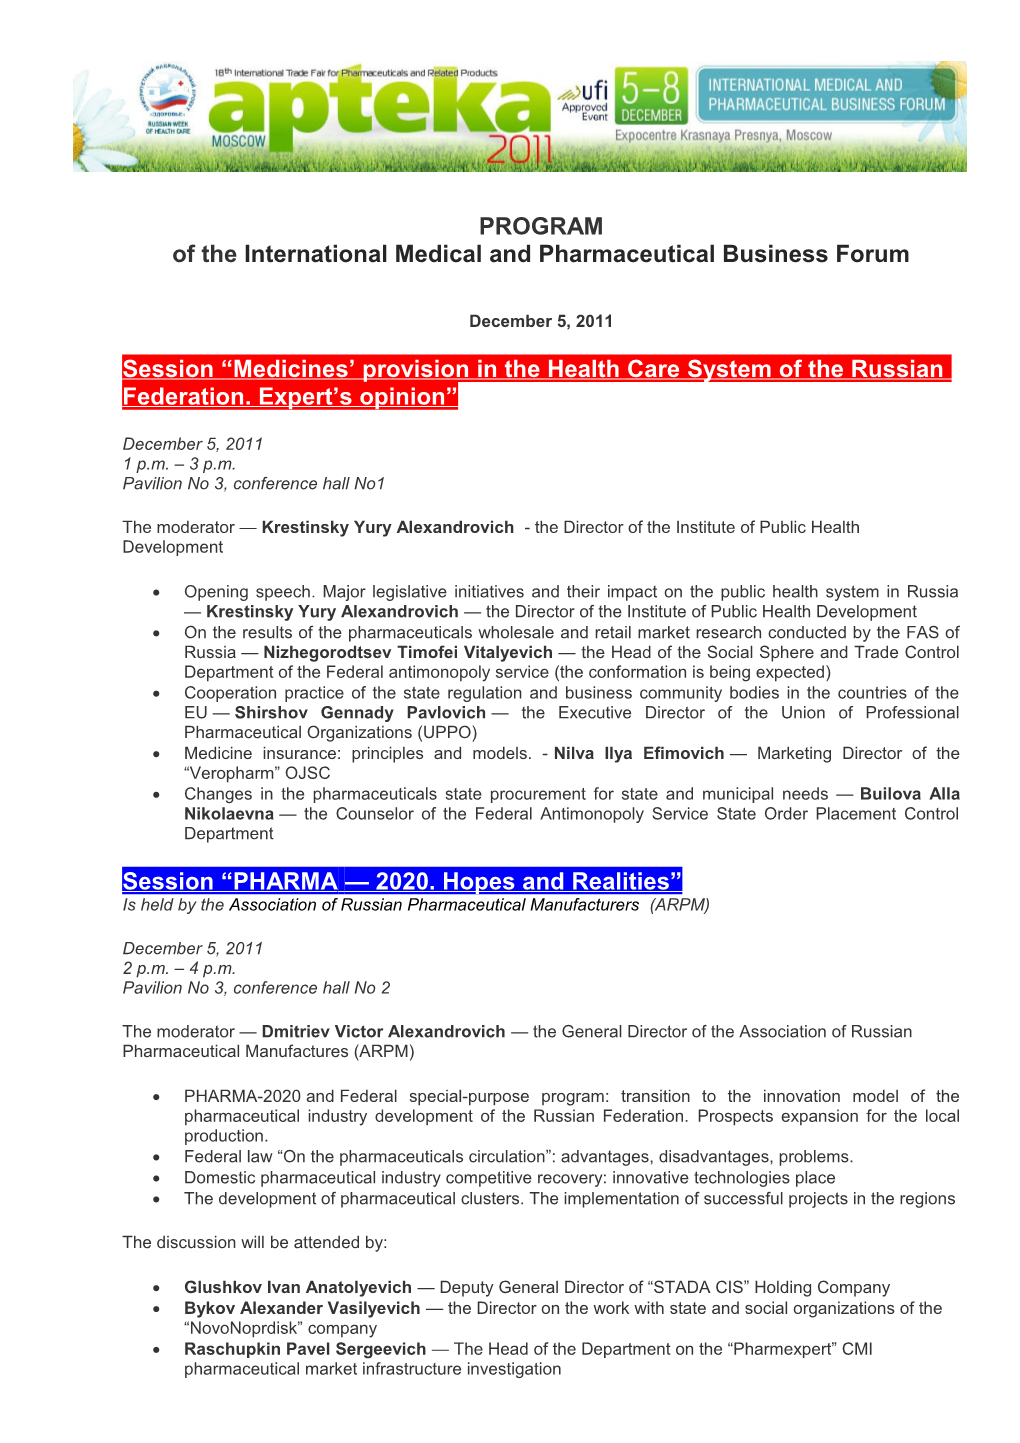 Of the International Medical and Pharmaceutical Business Forum